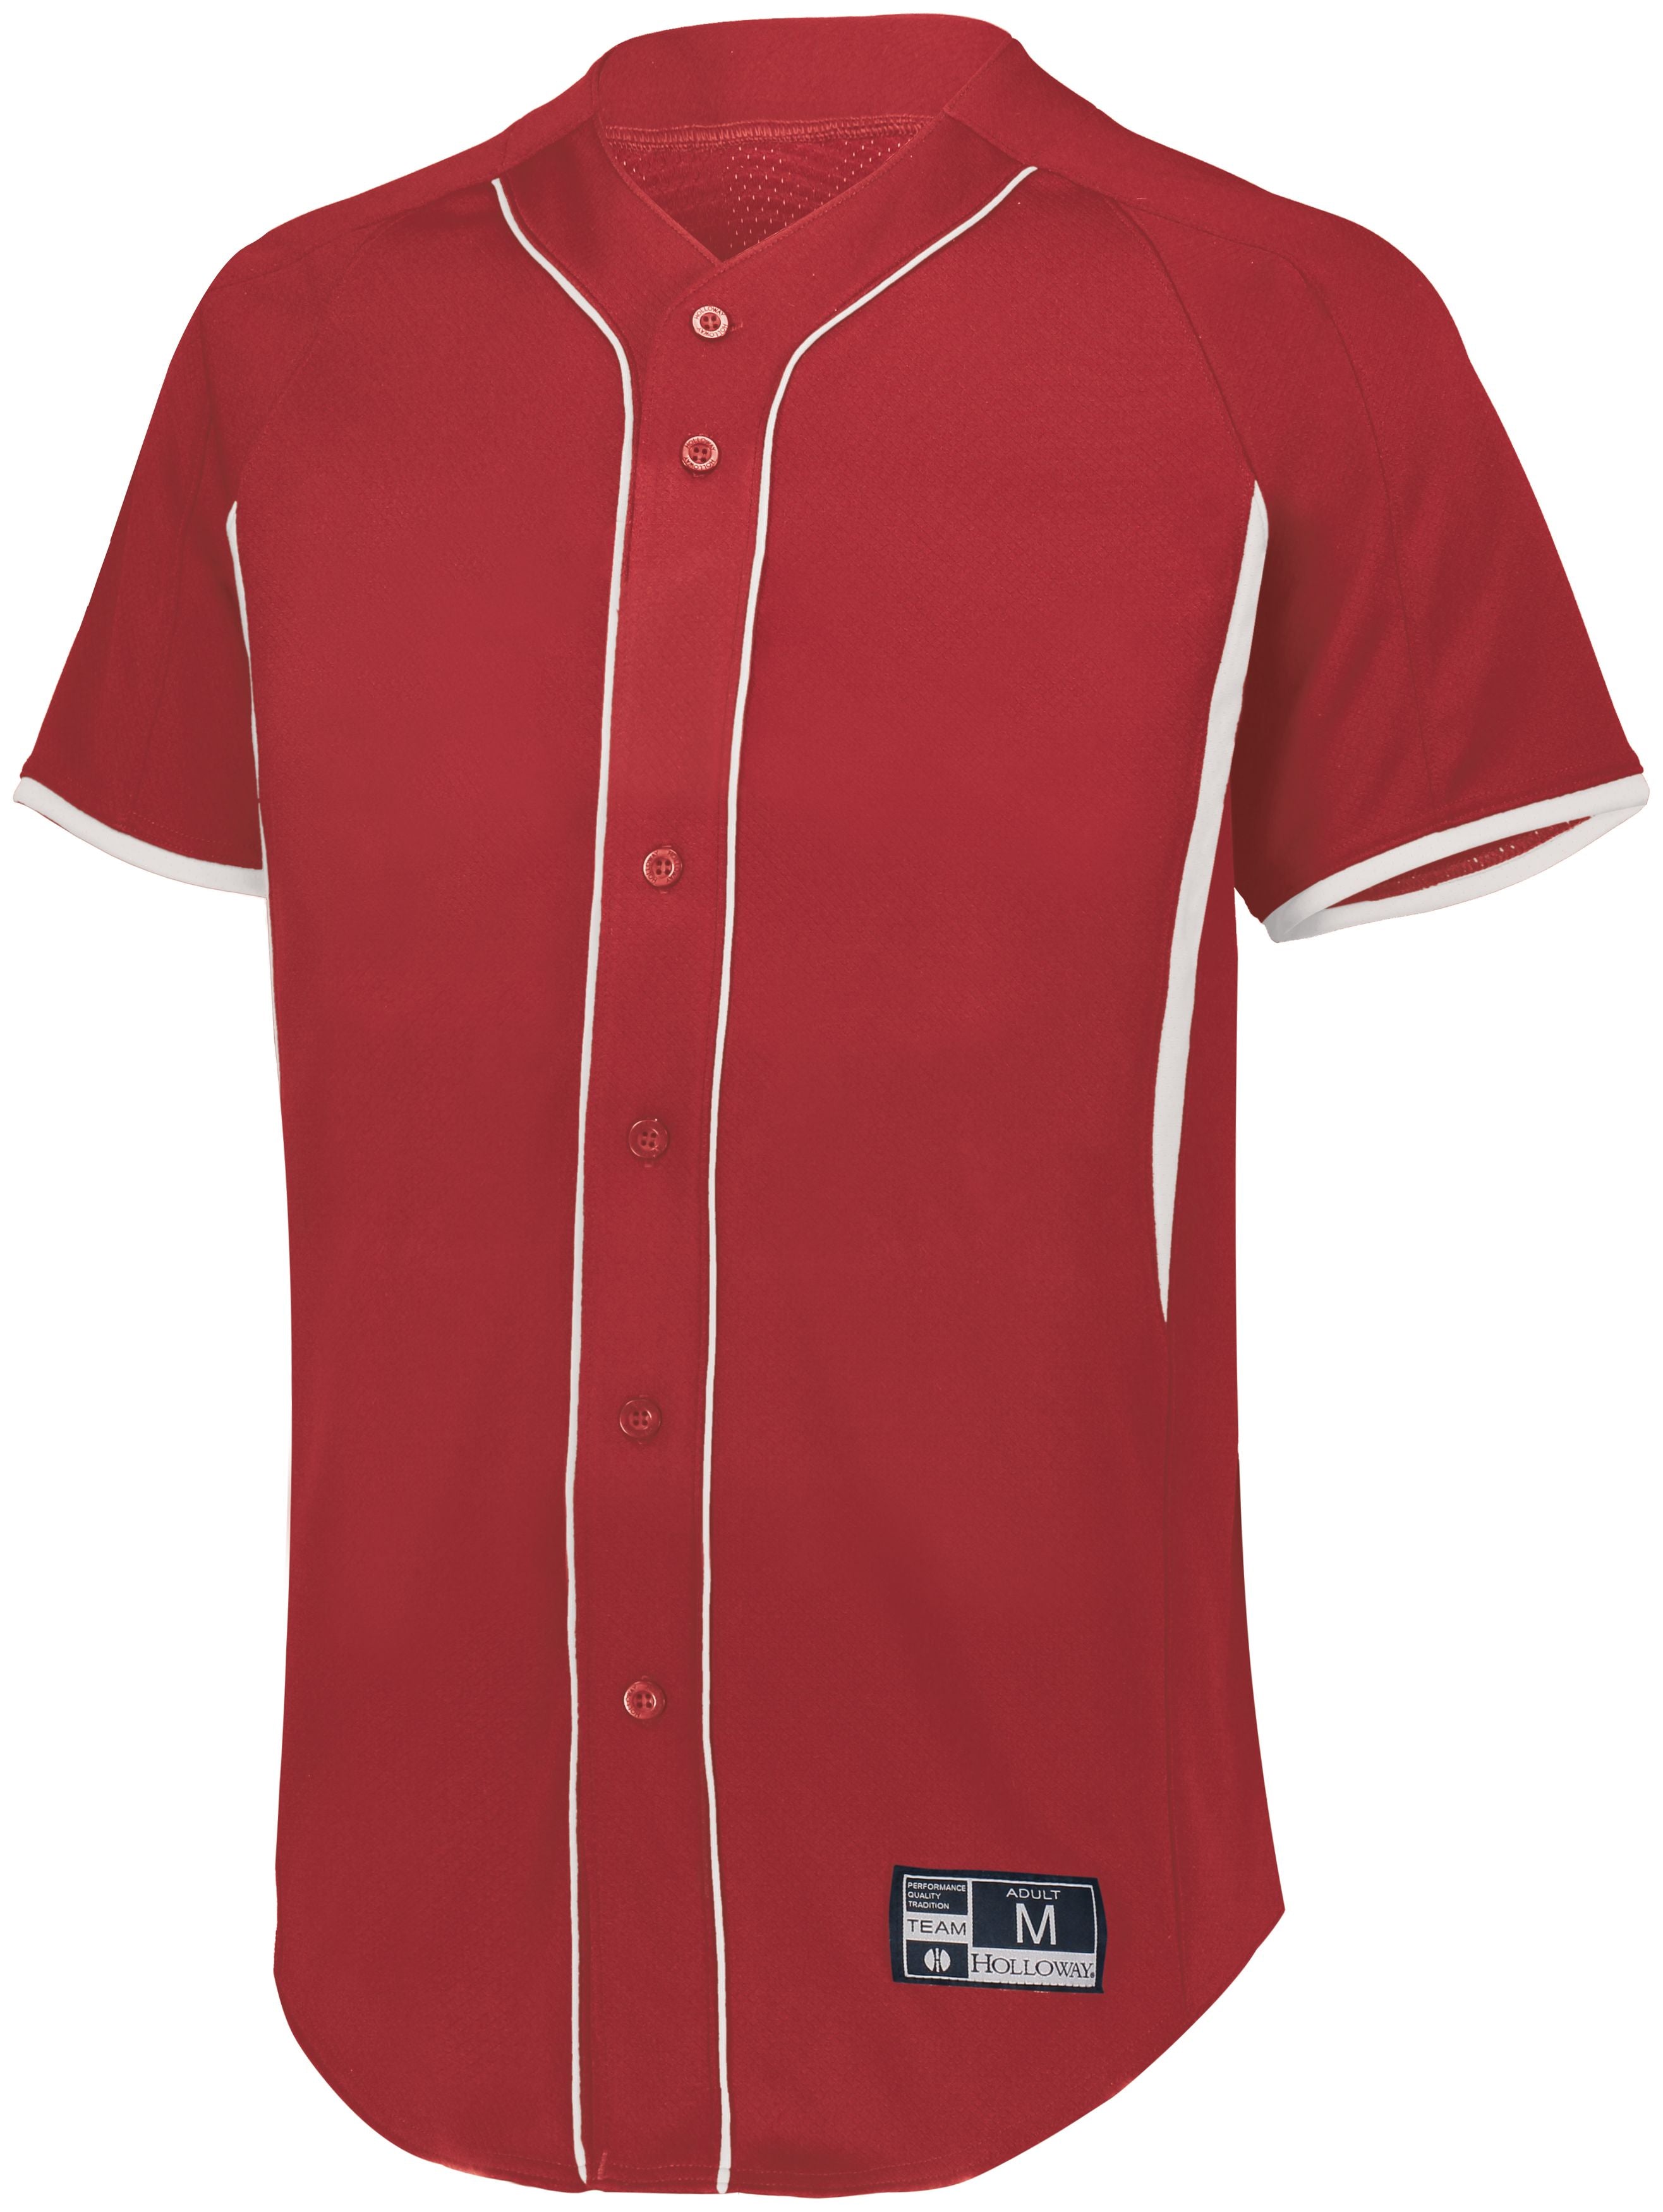 Holloway Youth  Game7 Full-Button Baseball Jersey in Scarlet/White  -Part of the Youth, Youth-Jersey, Baseball, Holloway, Shirts, All-Sports, All-Sports-1 product lines at KanaleyCreations.com